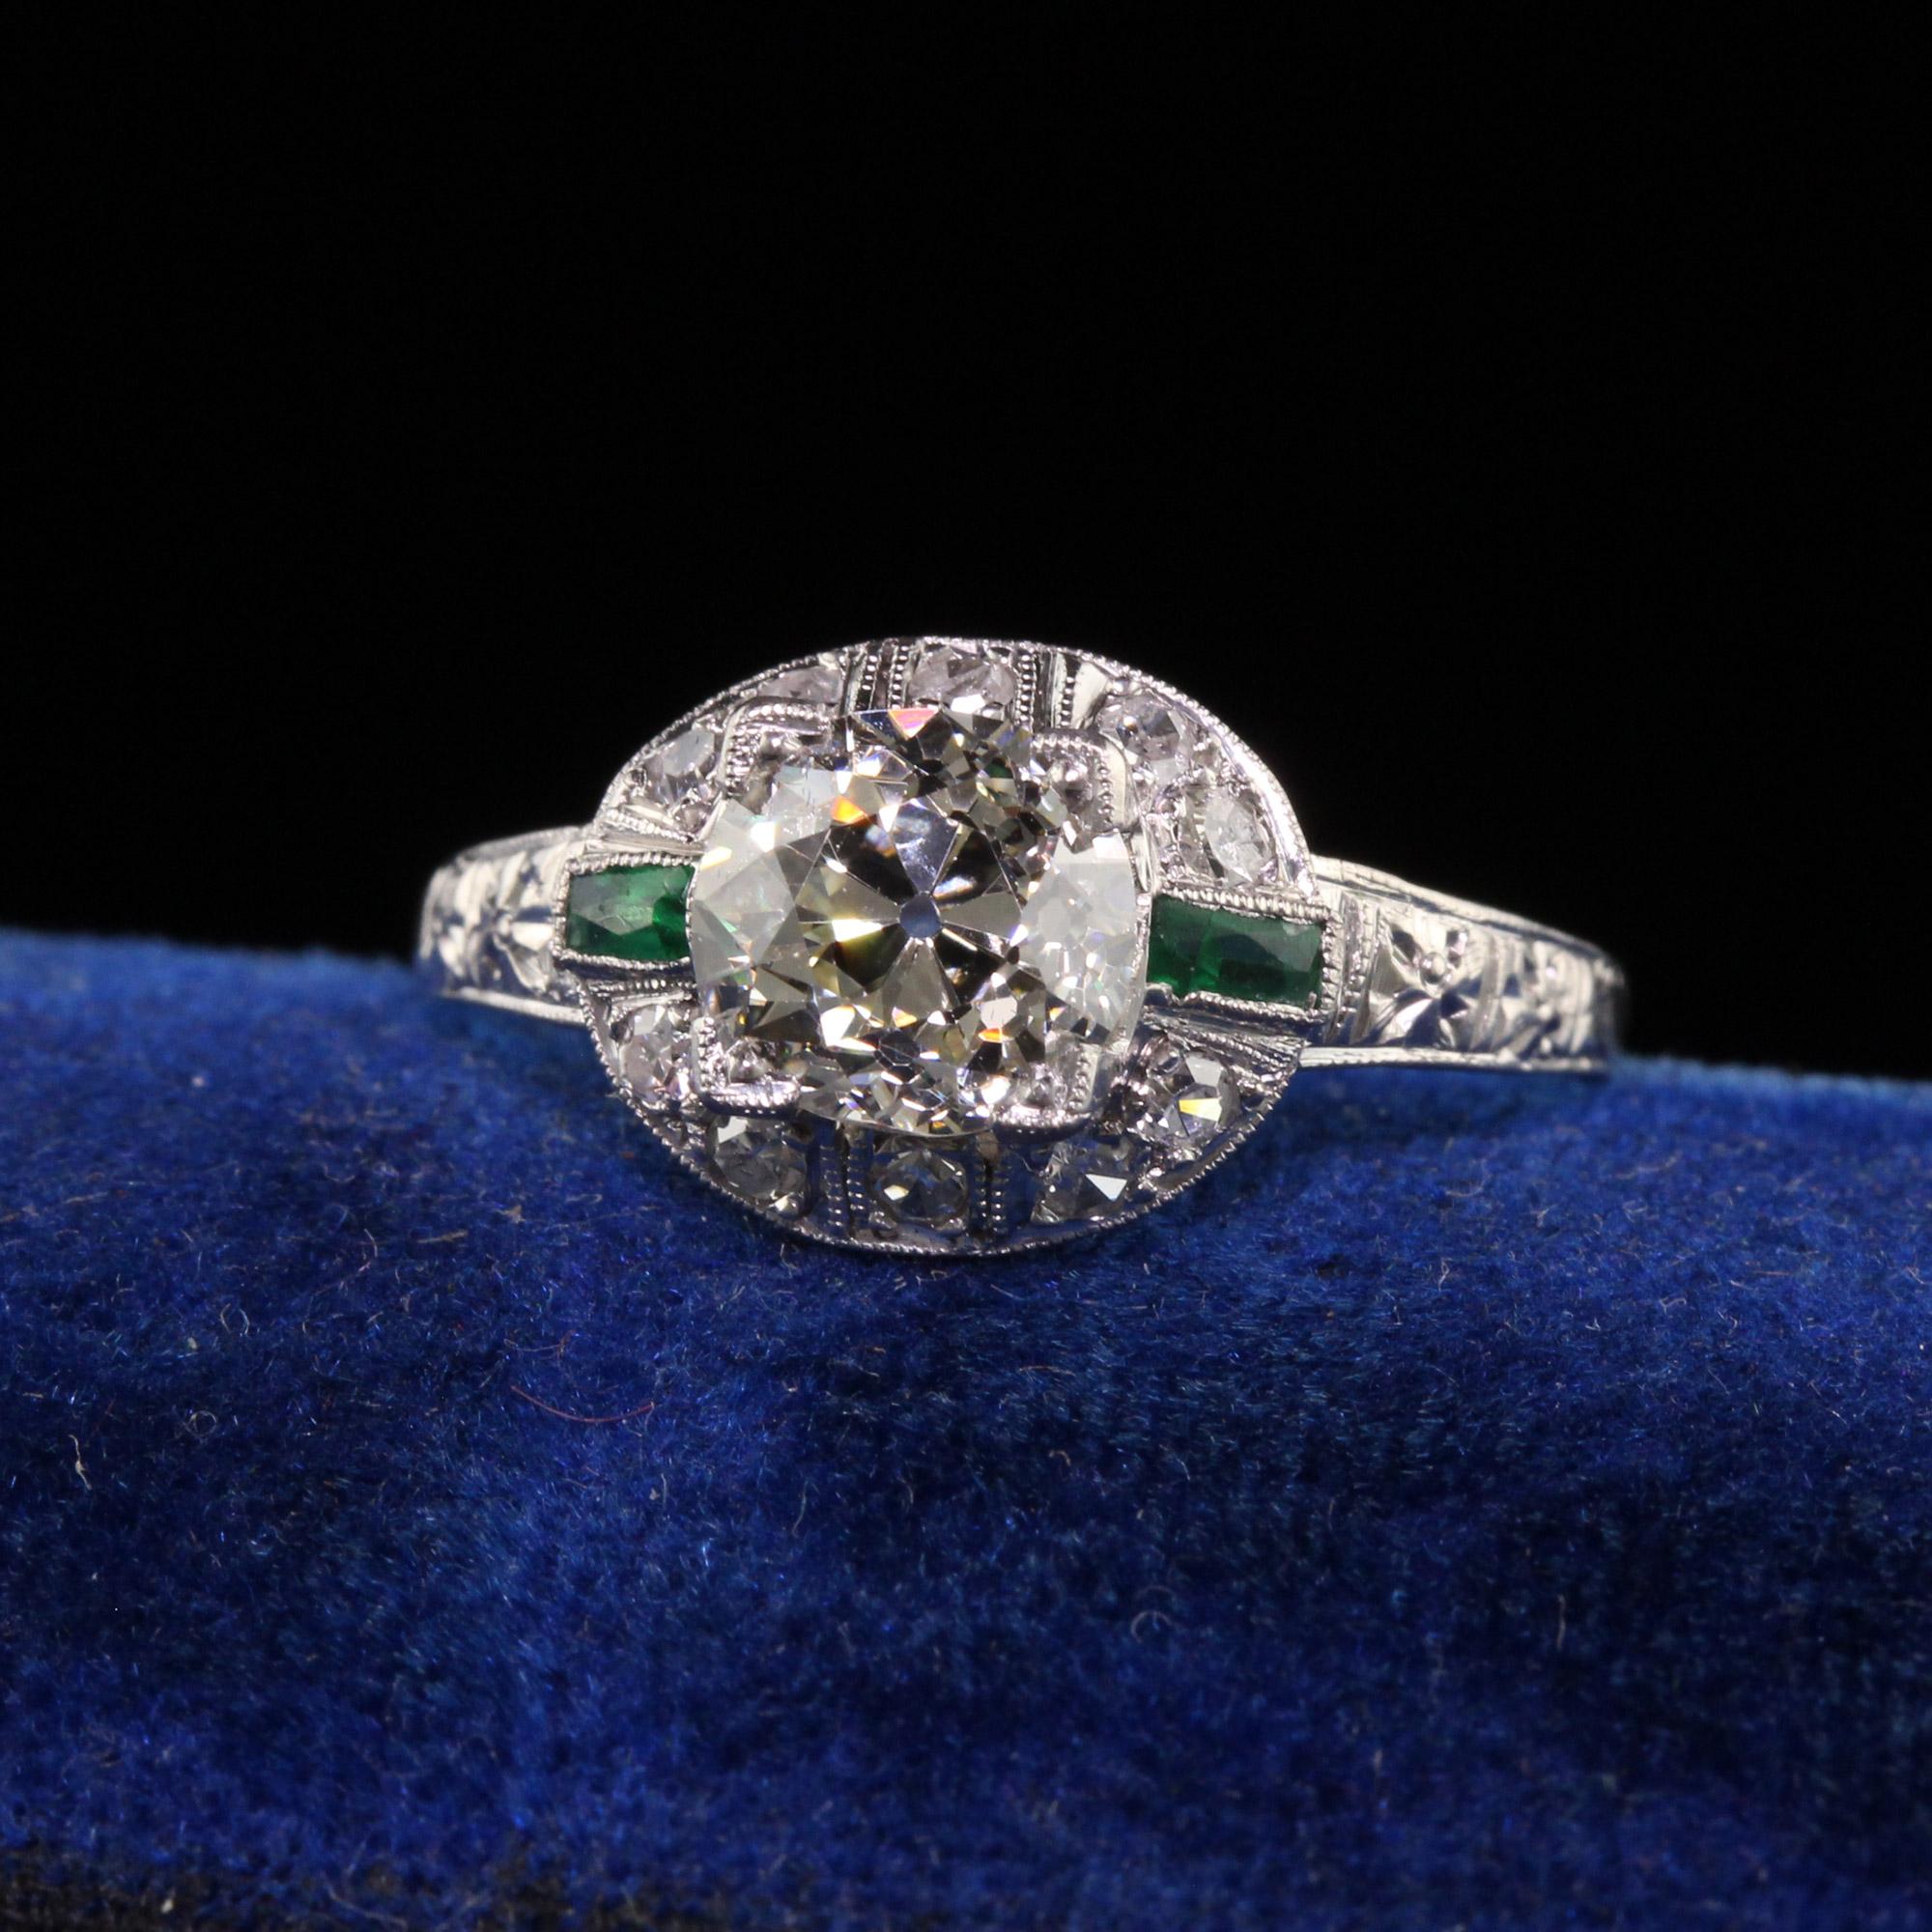 Beautiful Antique Art Deco Platinum Old European Cut Diamond Emerald Engagement Ring. This gorgeous engagement ring is crafted in platinum. The center holds an old european cut diamond and has emeralds on each side with diamonds above and below. The